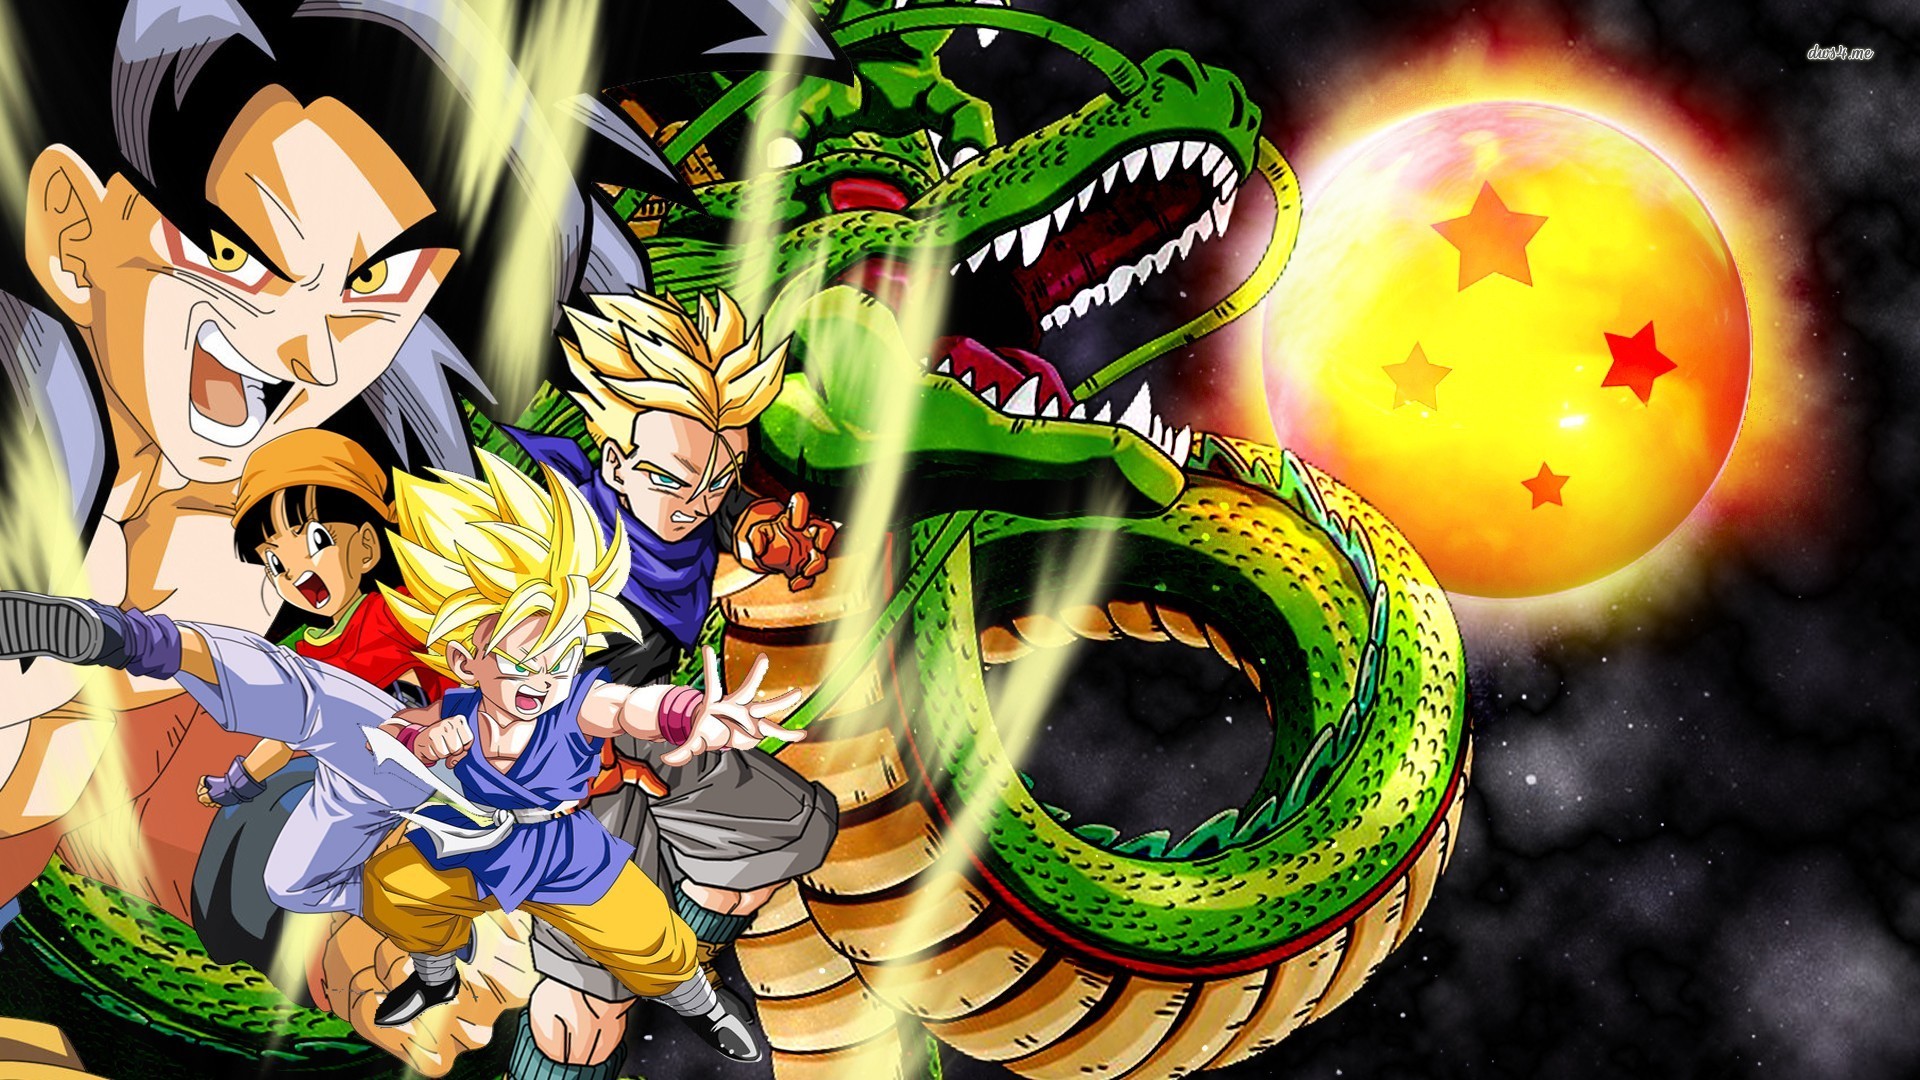 Free Download Dragon Ball Gt Wallpaper 1025838 1920x1080 For Your Desktop Mobile Tablet Explore 75 Dragonball Gt Wallpaper Dragon Ball Wallpaper Dragon Ball Z Kai Wallpaper Dragon Ball Z Wallpaper 1920x1080